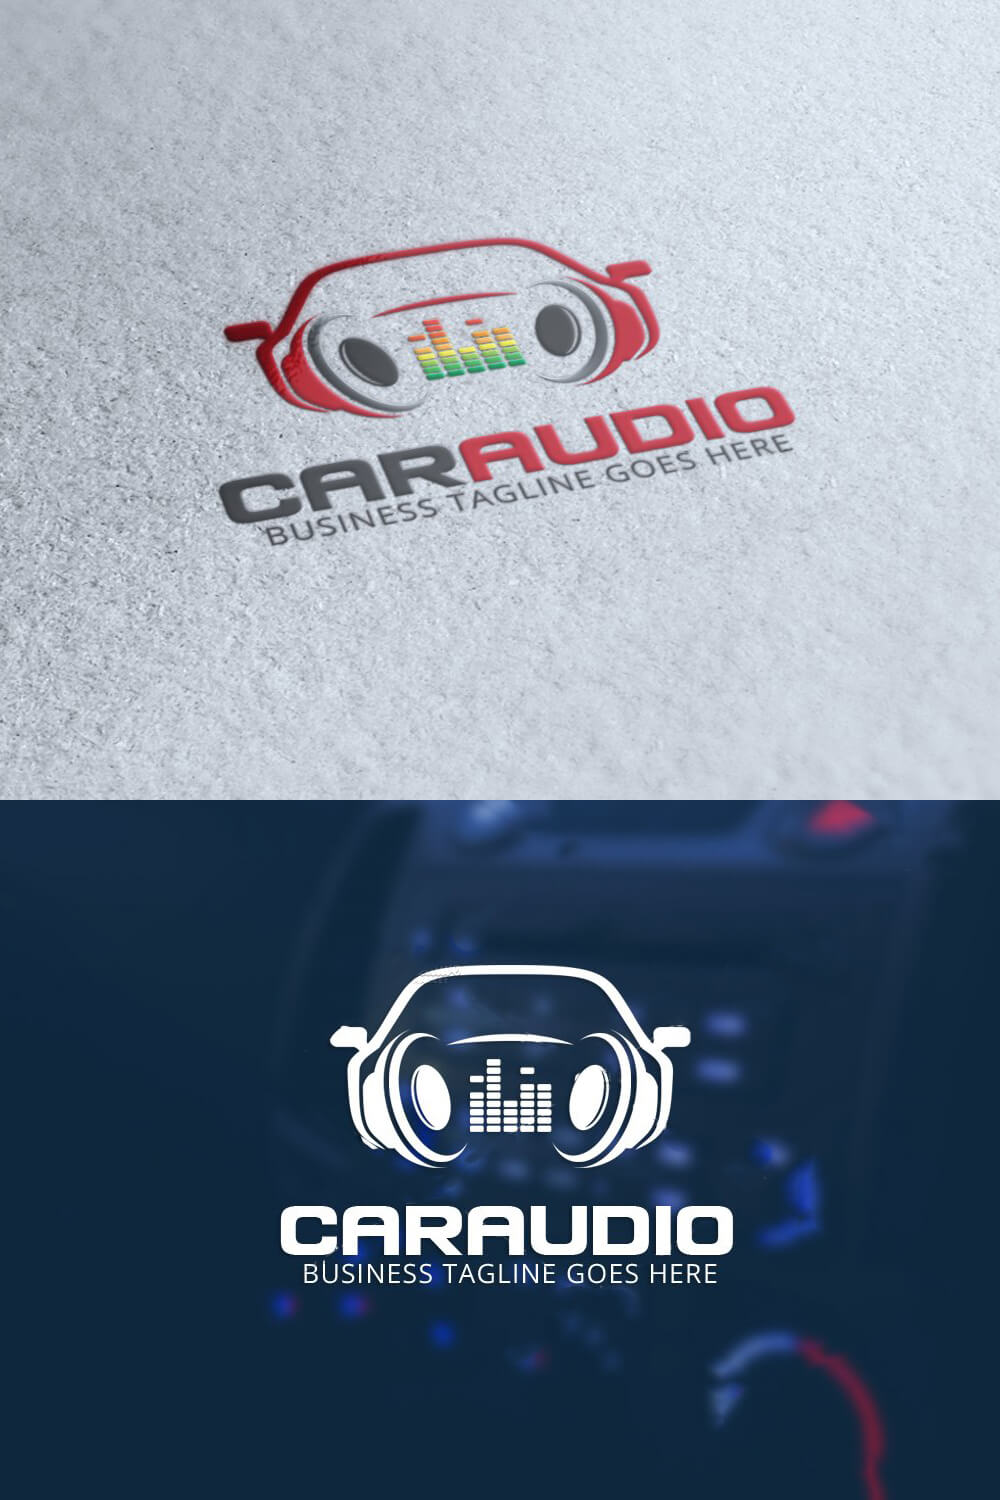 Caraudio logo on blue blurred and gray fabric backgrounds.